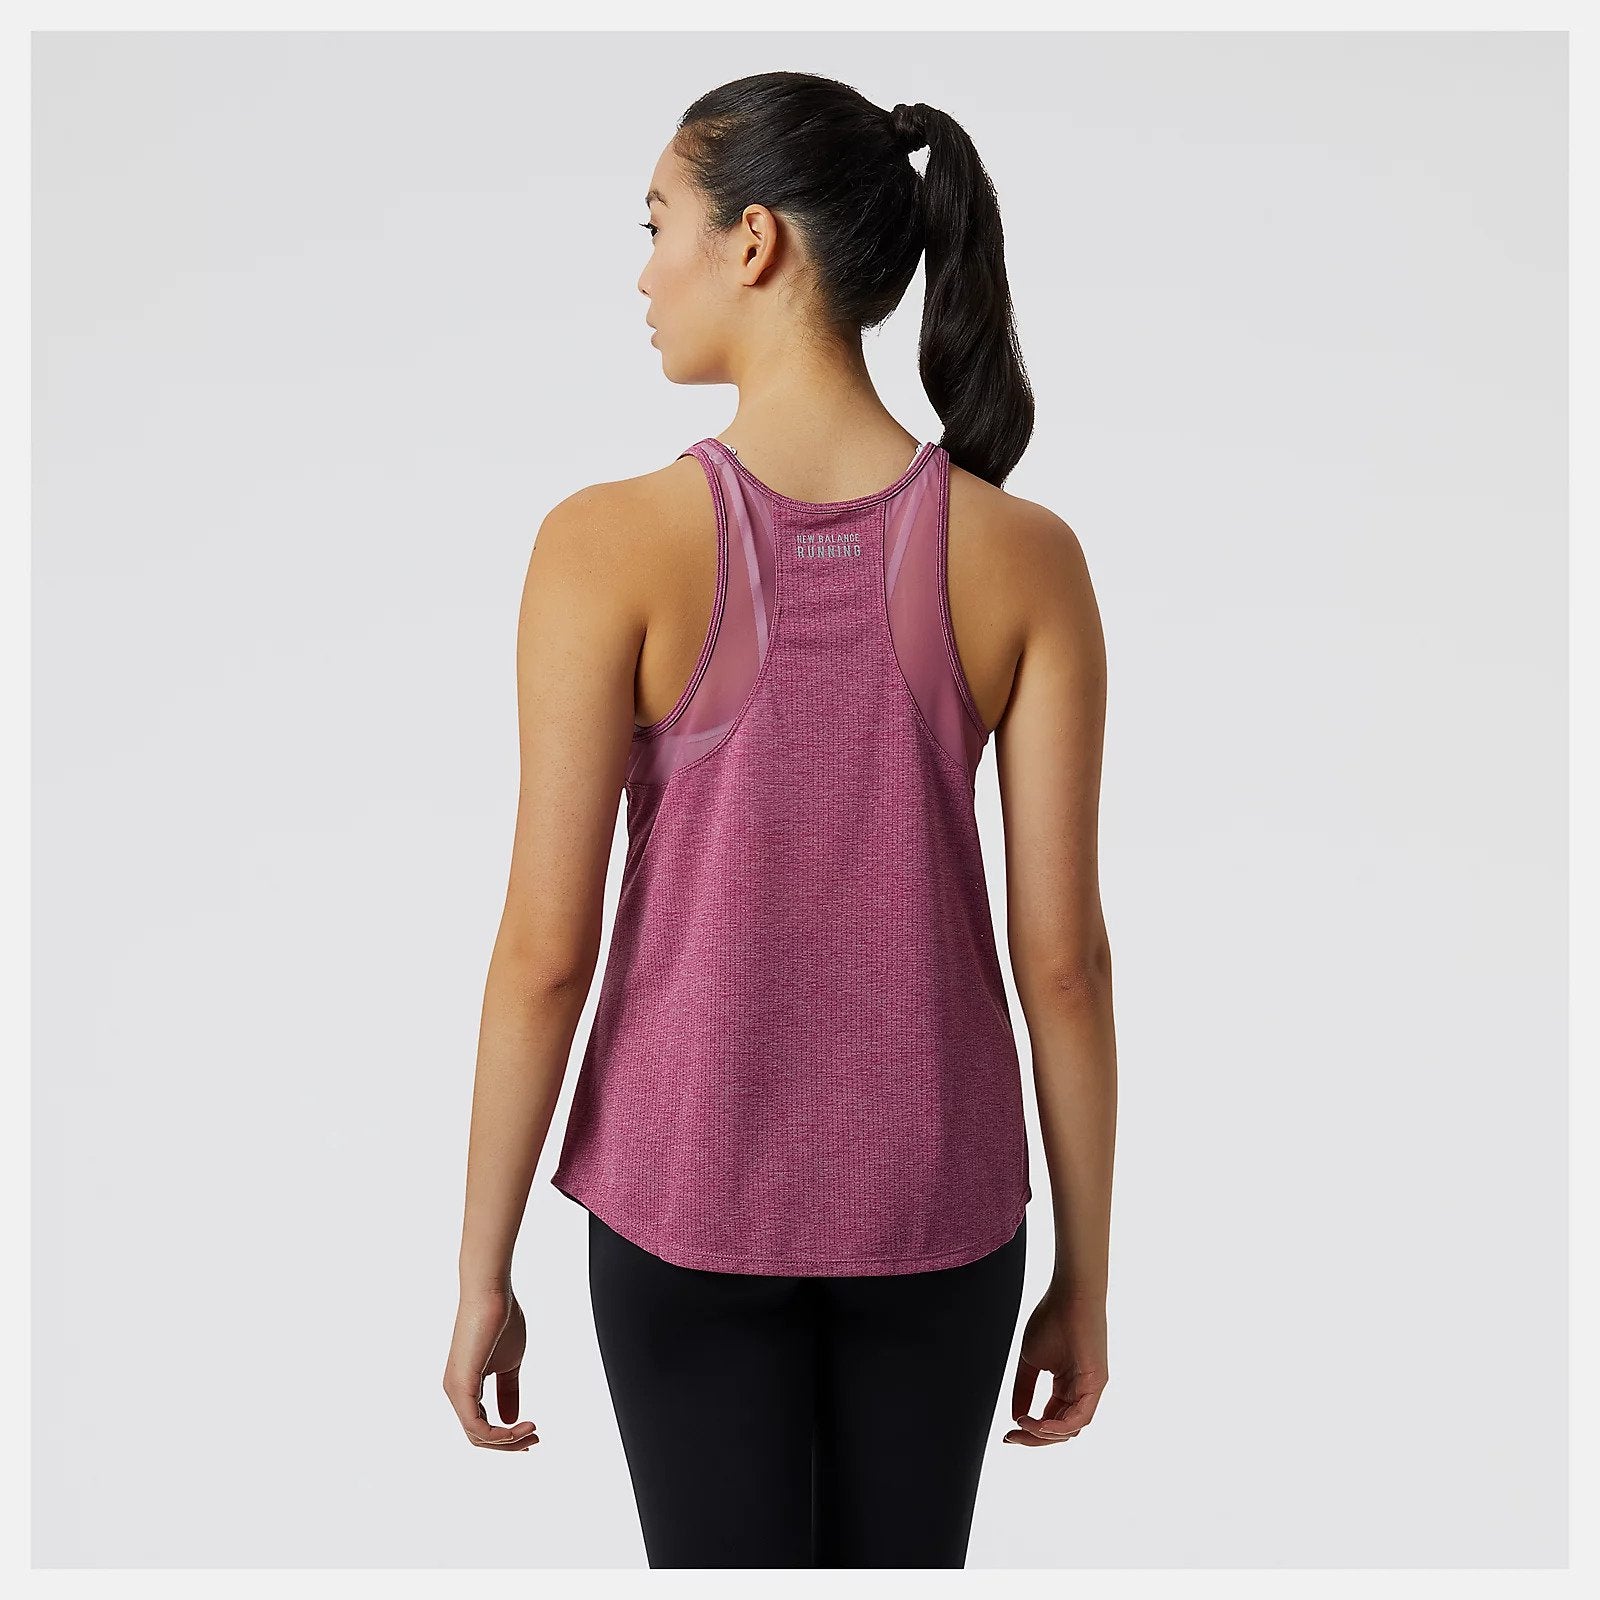 The Impact Run Tank was designed for impressive cooling and breathability throughout your run. This women's workout tank top features a lightweight mesh fabric with fast-drying NB ICEx technology to help you feel cool and comfortable. Plus, reflective branding and piping adds a stylish touch.